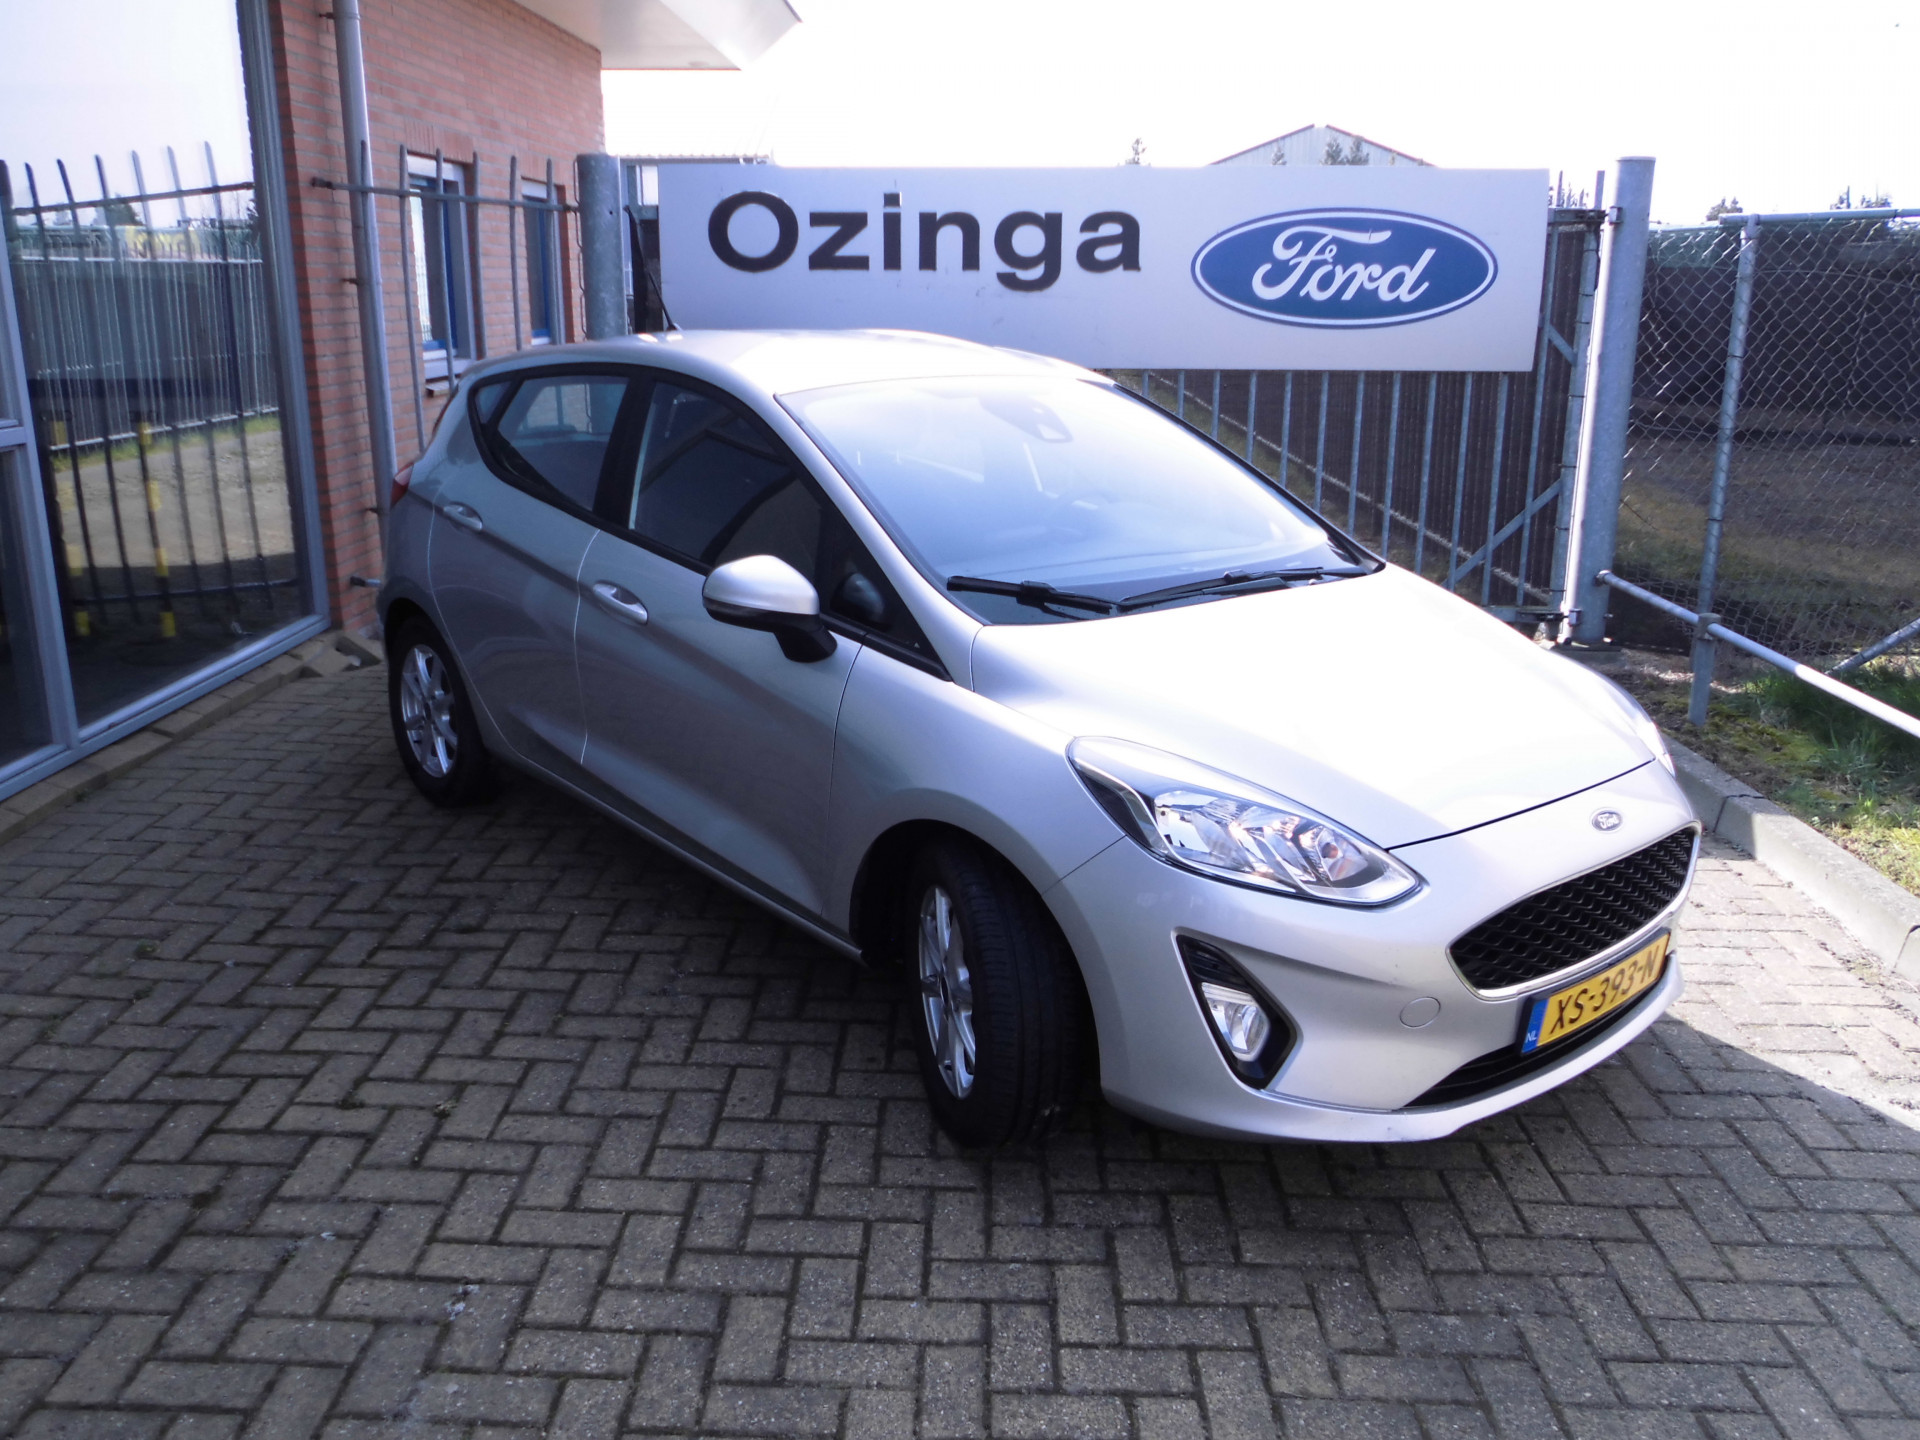 Ford Fiesta Trend-Airco-Pdc-Apple-carplay cruisecontrole bij viaBOVAG.nl